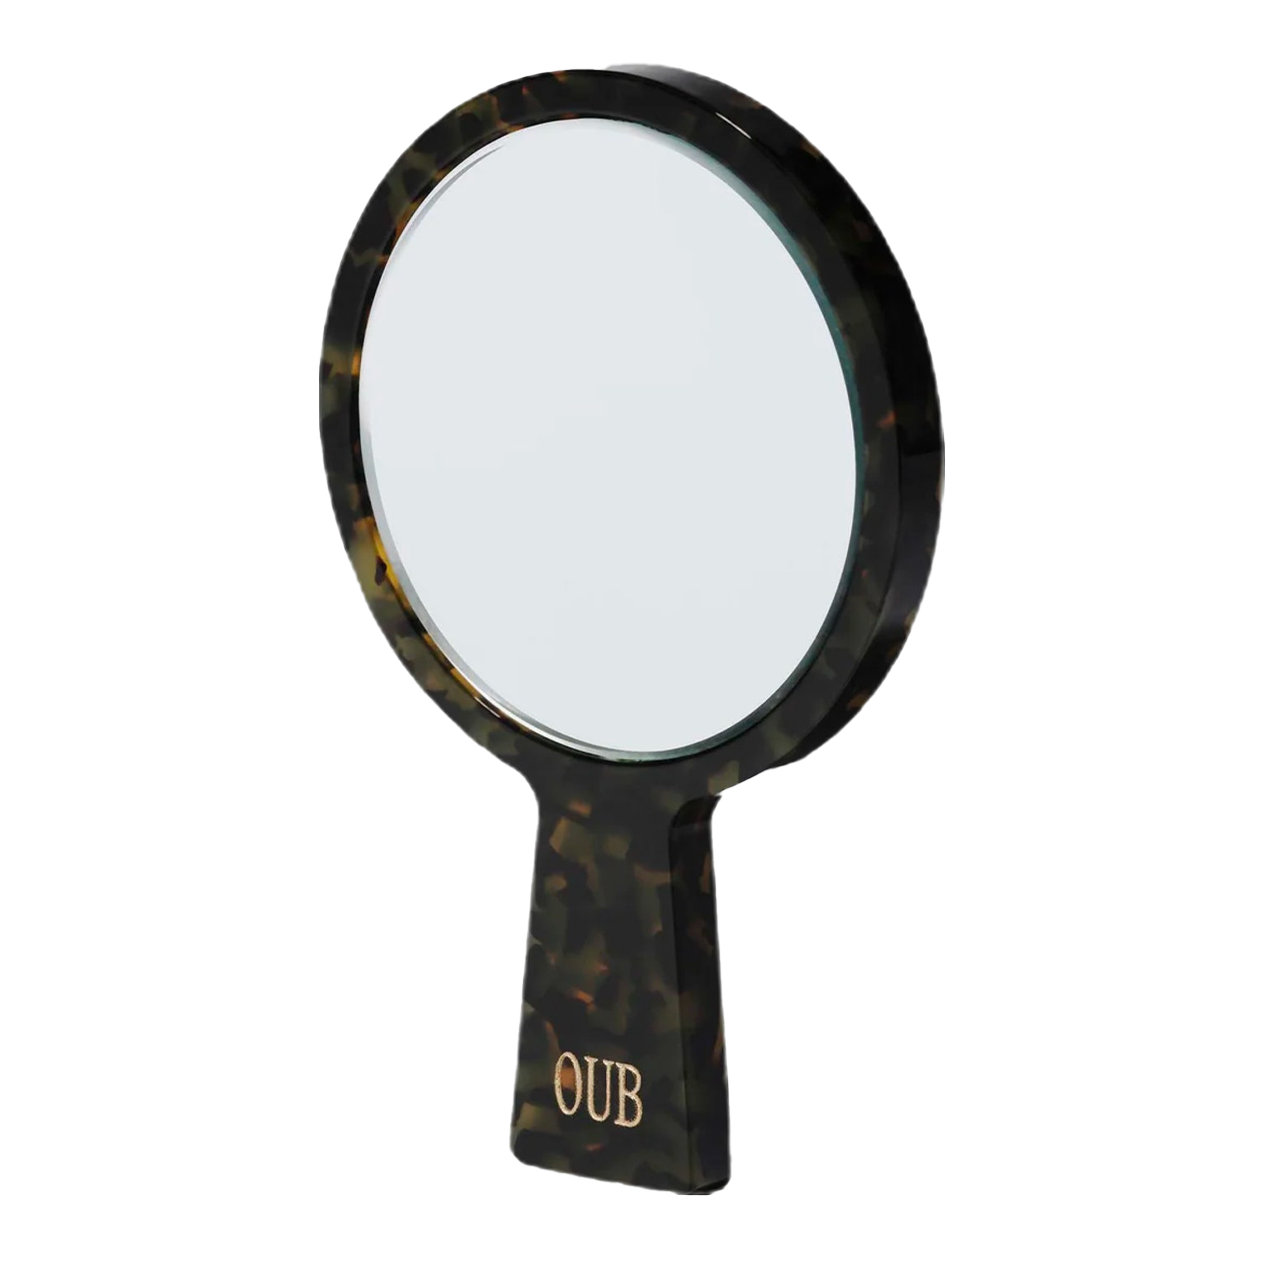 Buly 1803 acetate hand mirror